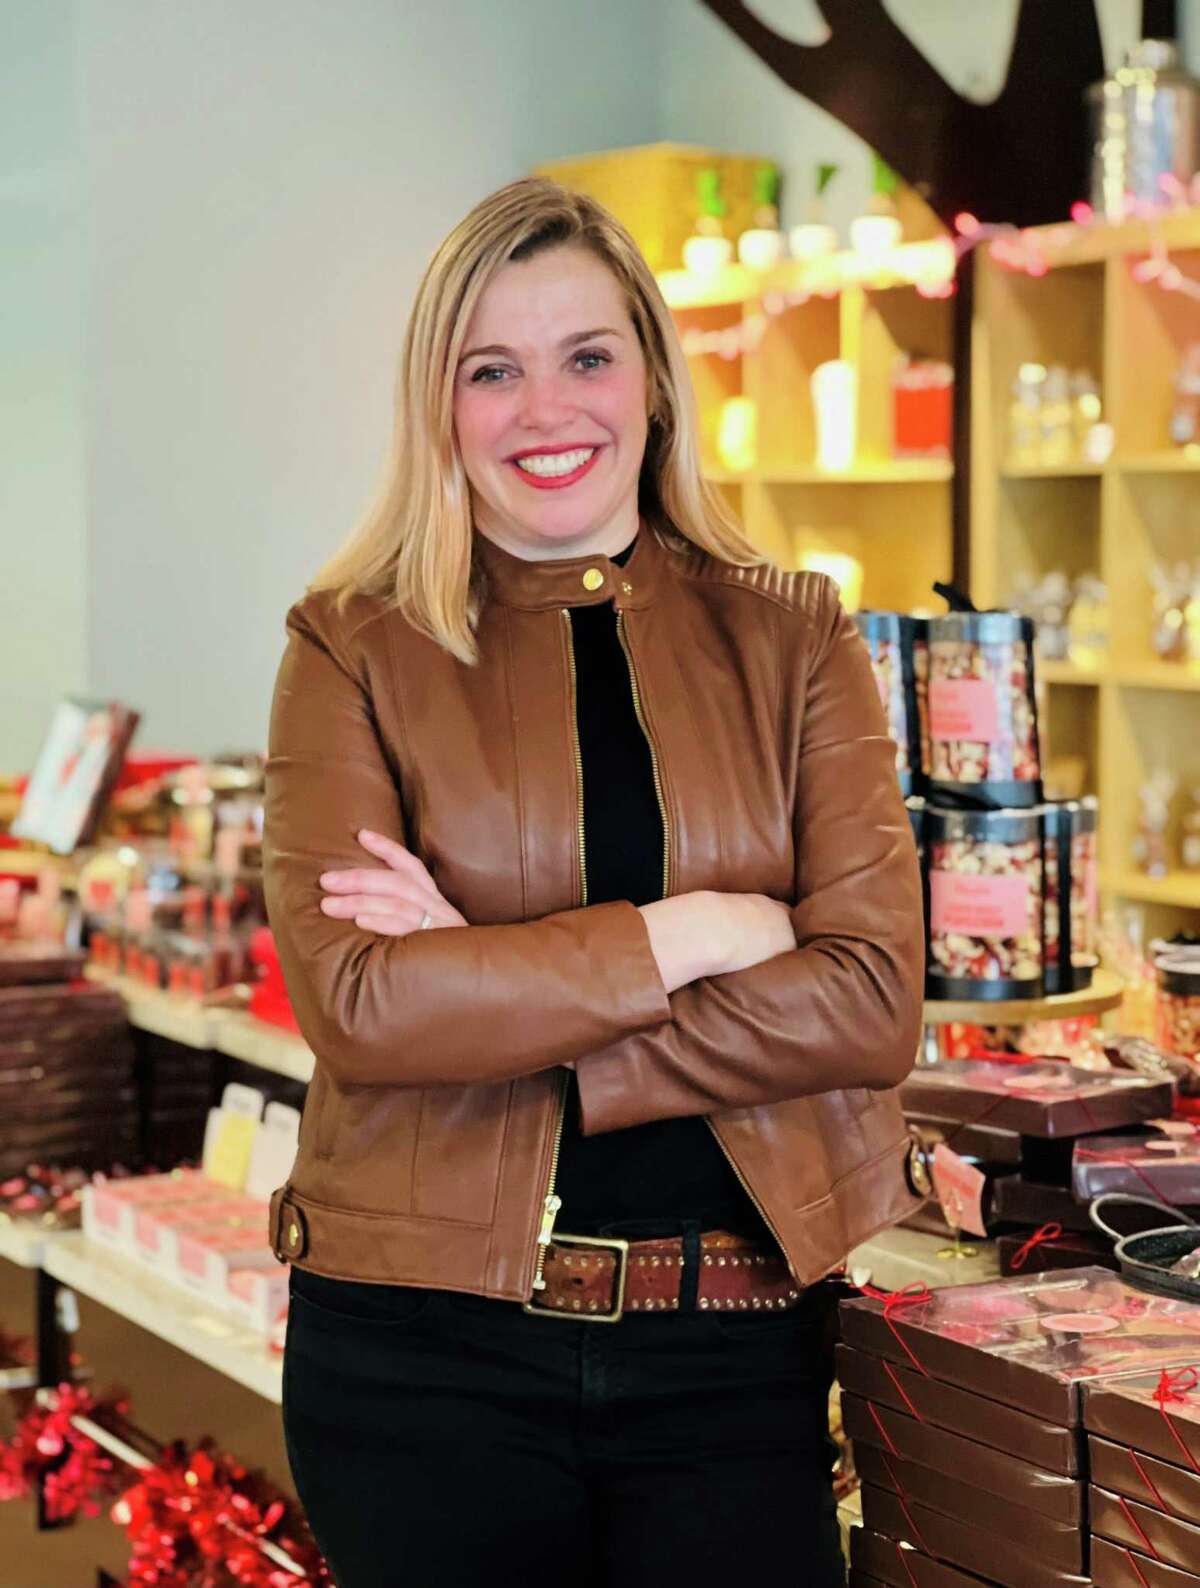 Molly Voorhees, president of The Chocolate Bar, will open Winfield’s Chocolate Bar this summer at The Centre at River Oaks.